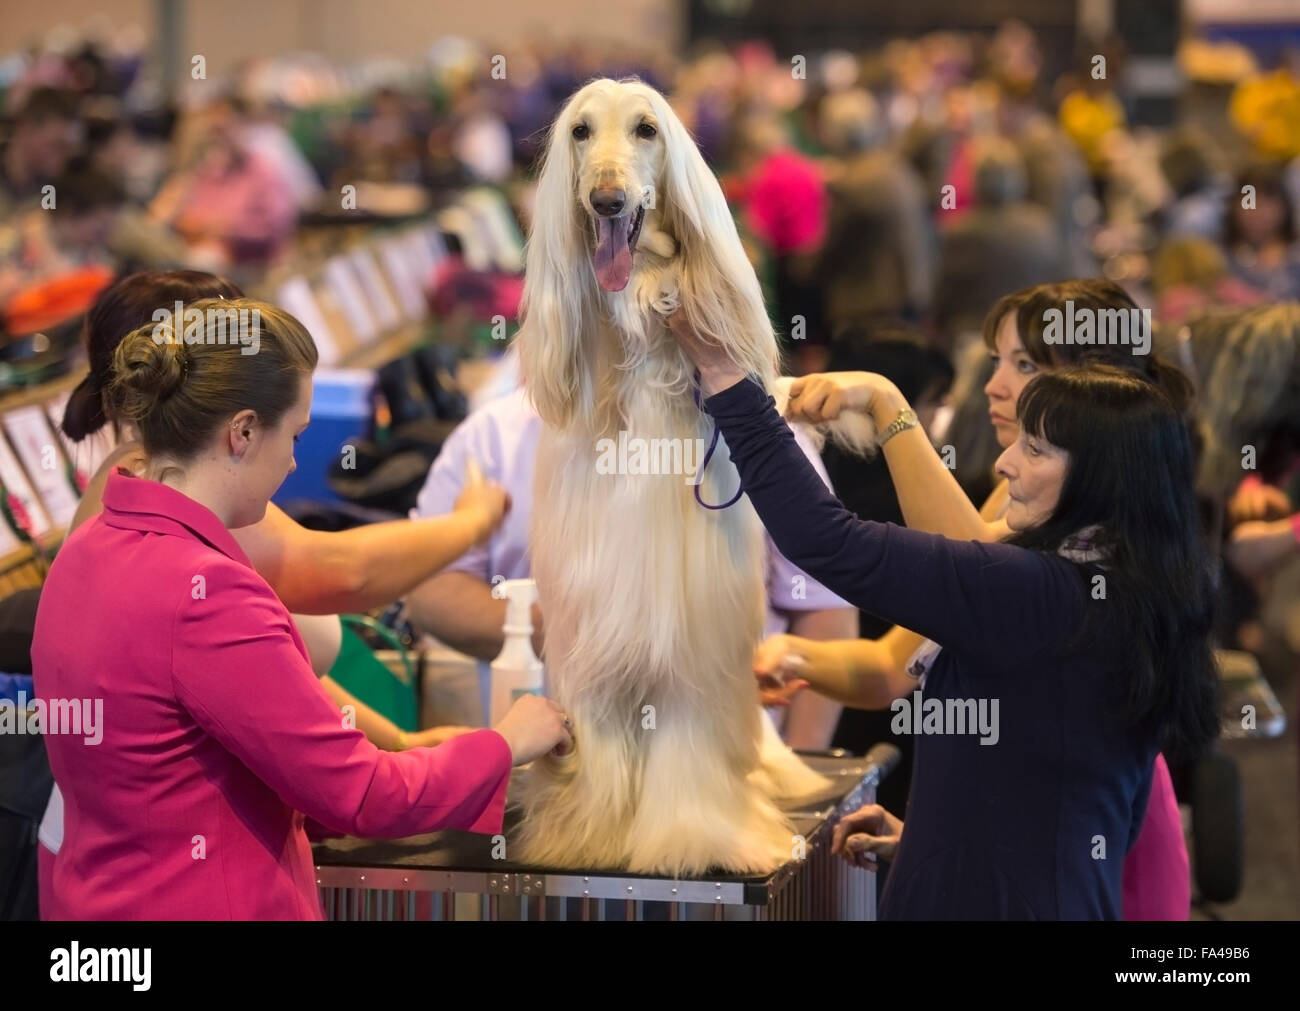 Crufts dog show at the NEC, Birmingham - an Afghan Hound with the pet name ‘Marcus’ is groomed before showing Stock Photo